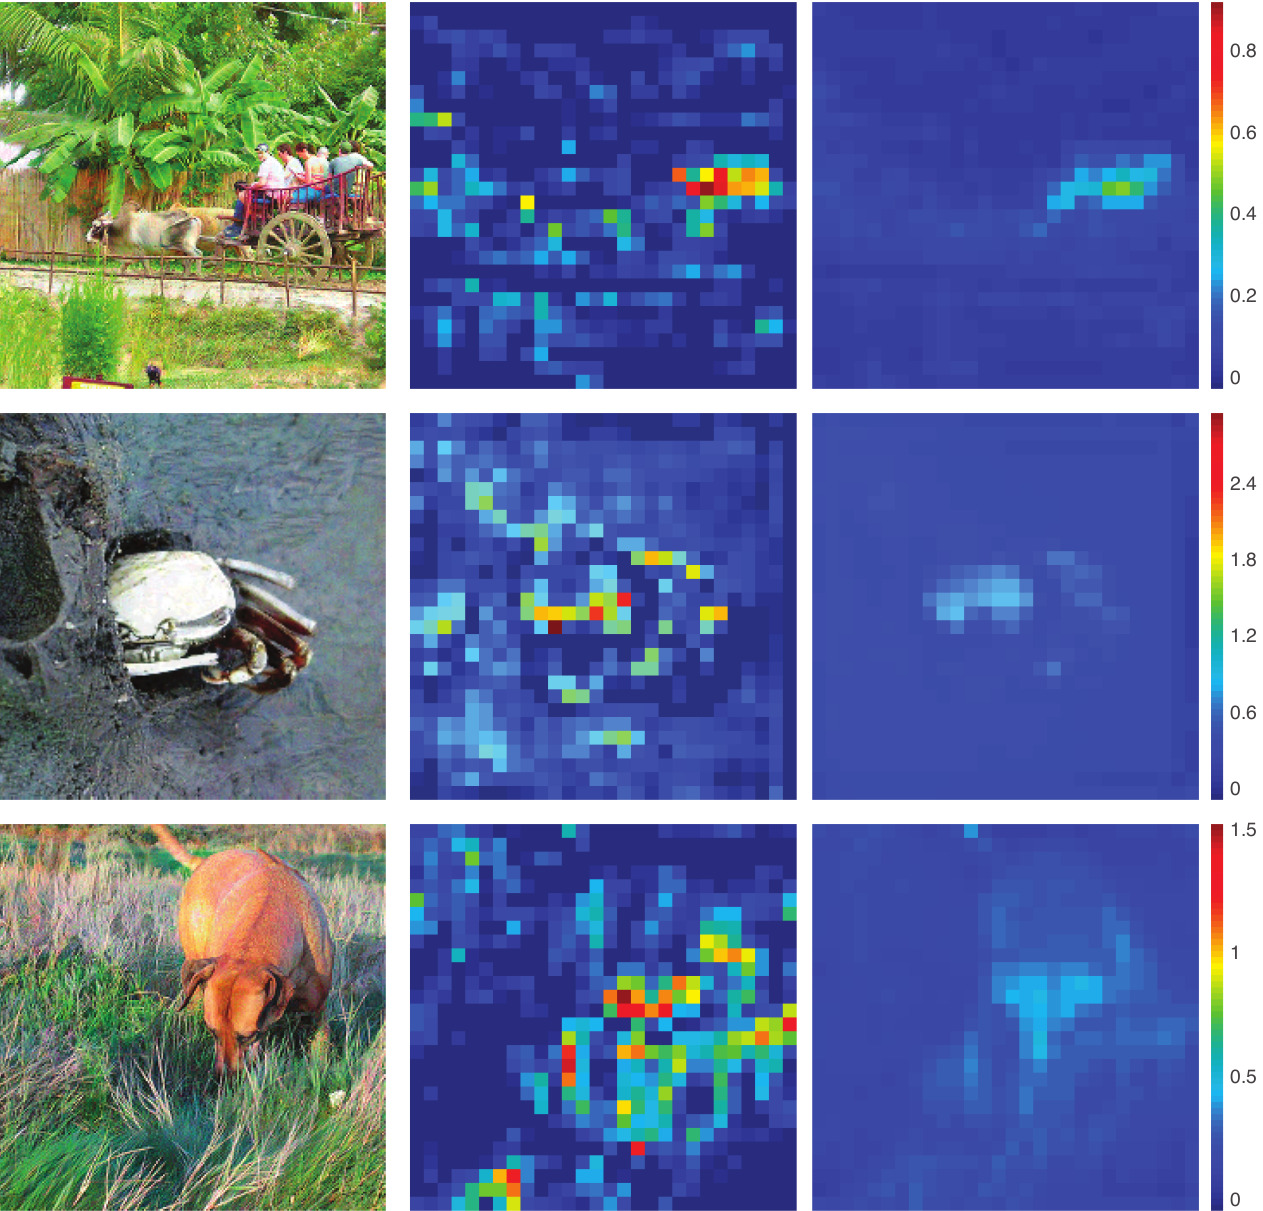 Feature Denoising for Improving Adversarial Robustness